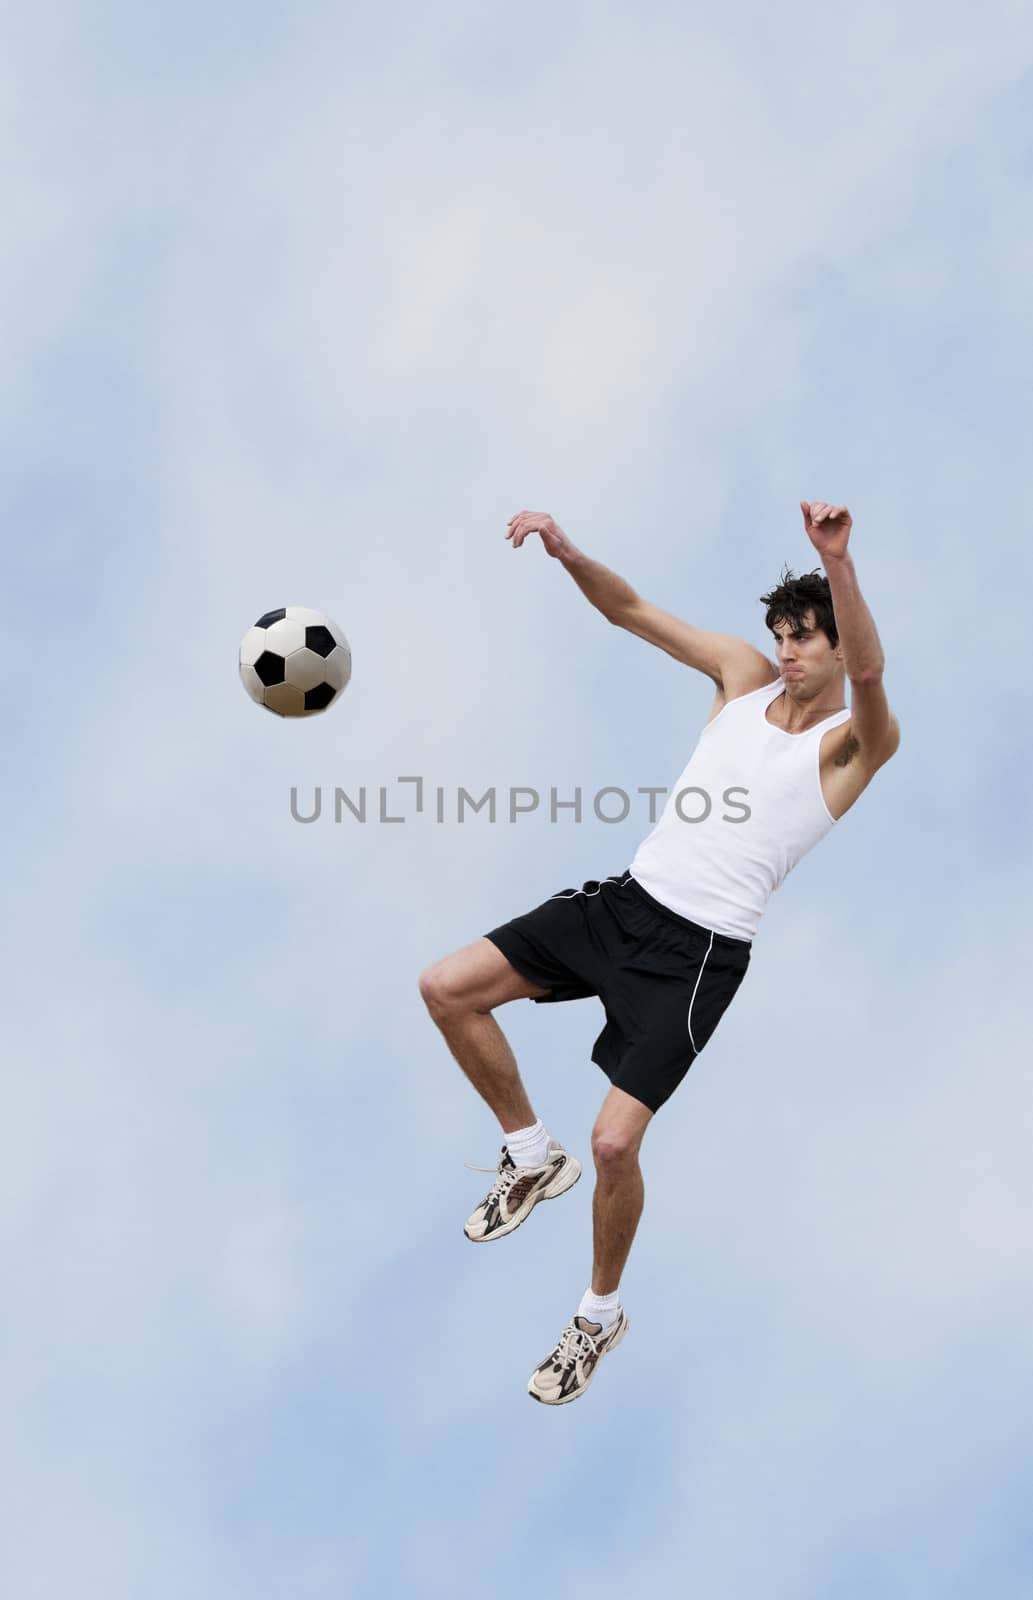 A soccer player jumps up into the air and hits the ball with his knee.